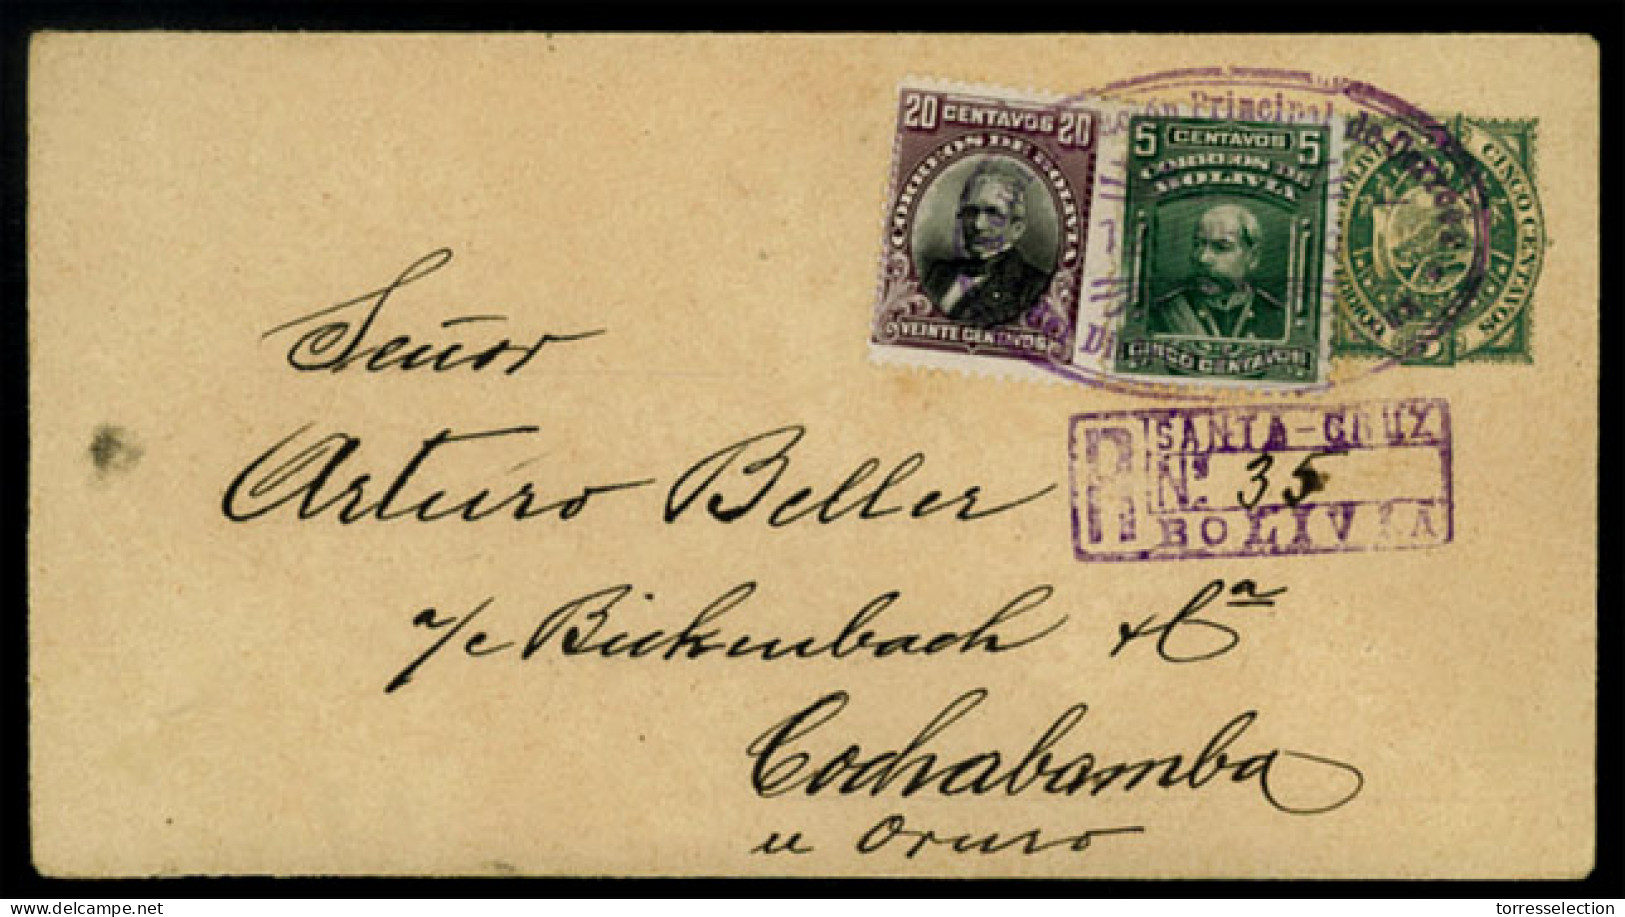 BOLIVIA. BOLIVIA. 1916 (Jan 12). 5c Green Stationery Envelope Sent Registered To Cochabamba Up-rated With 1901 20c Viole - Bolivie